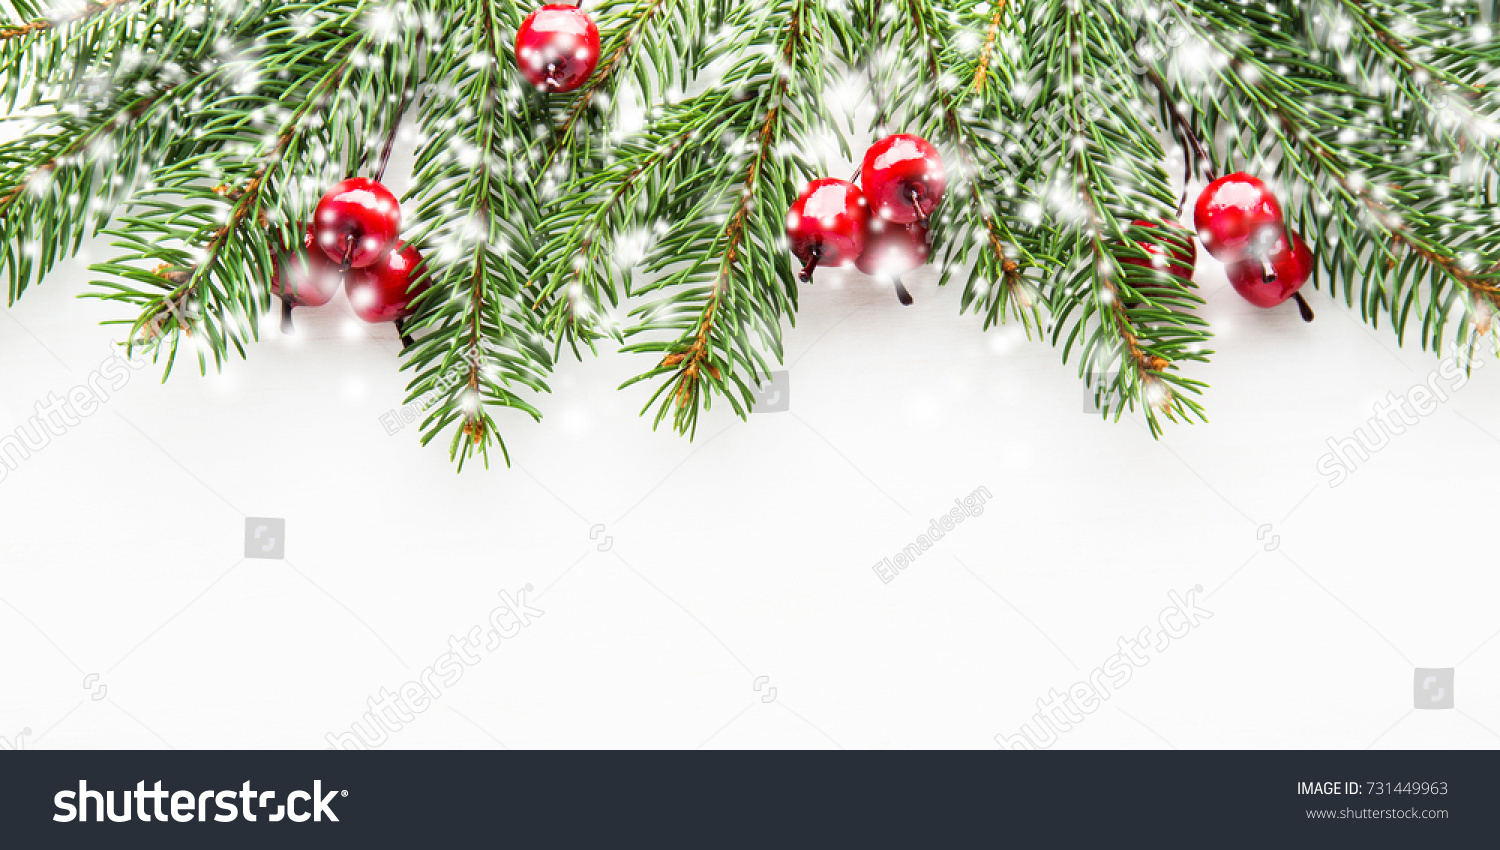 Christmas background with xmas tree, red berries on white wooden background. Merry christmas greeting card, frame, banner. Winter holiday theme. Happy New Year. Space for text. Flat lay. Snow effect. #731449963